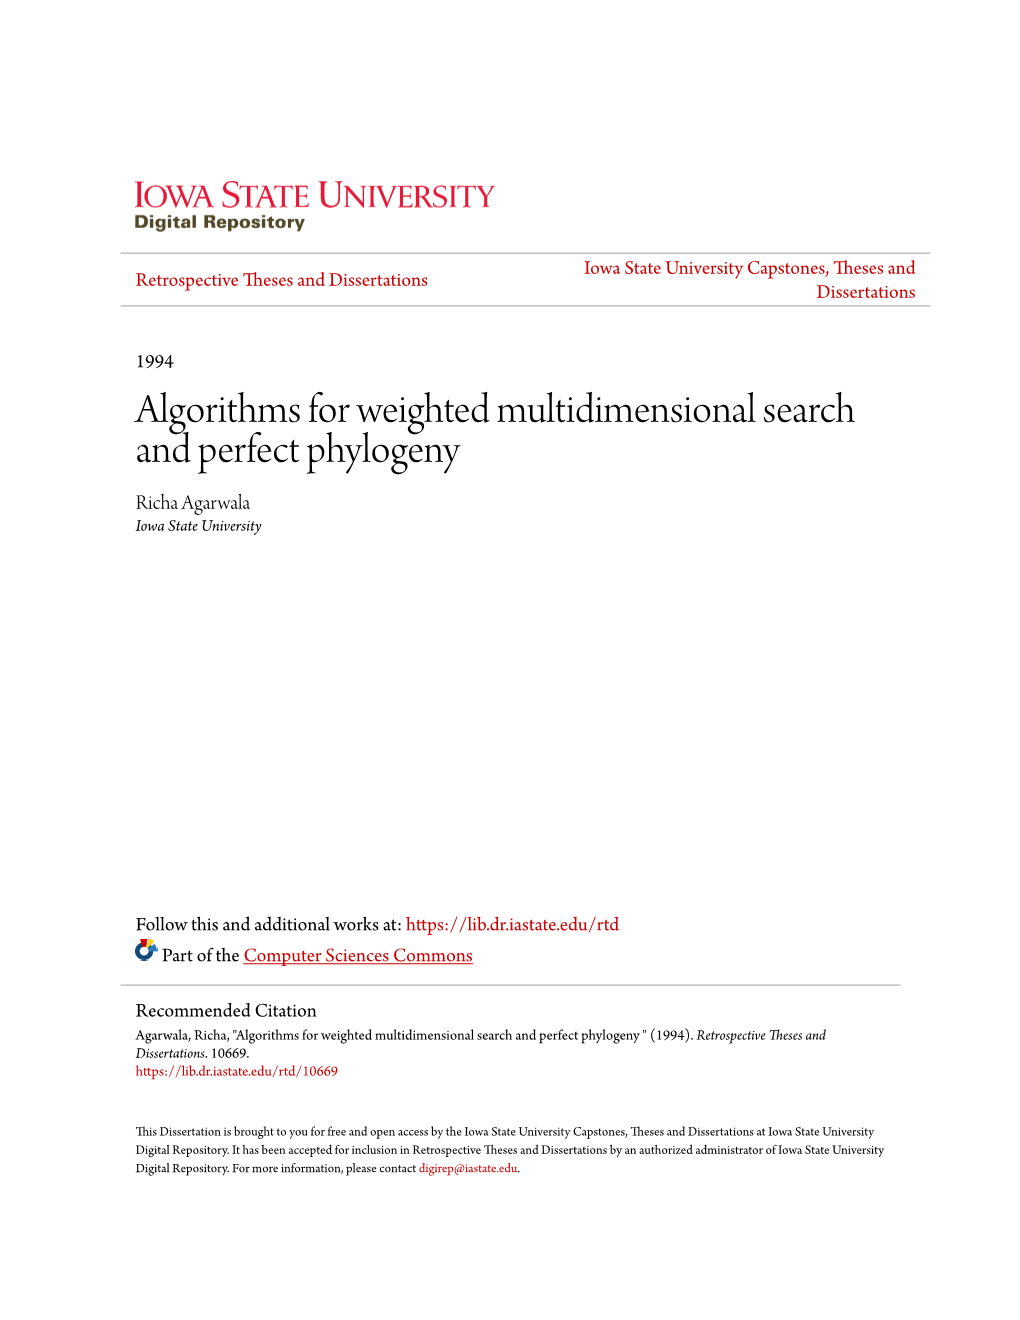 Algorithms for Weighted Multidimensional Search and Perfect Phylogeny Richa Agarwala Iowa State University